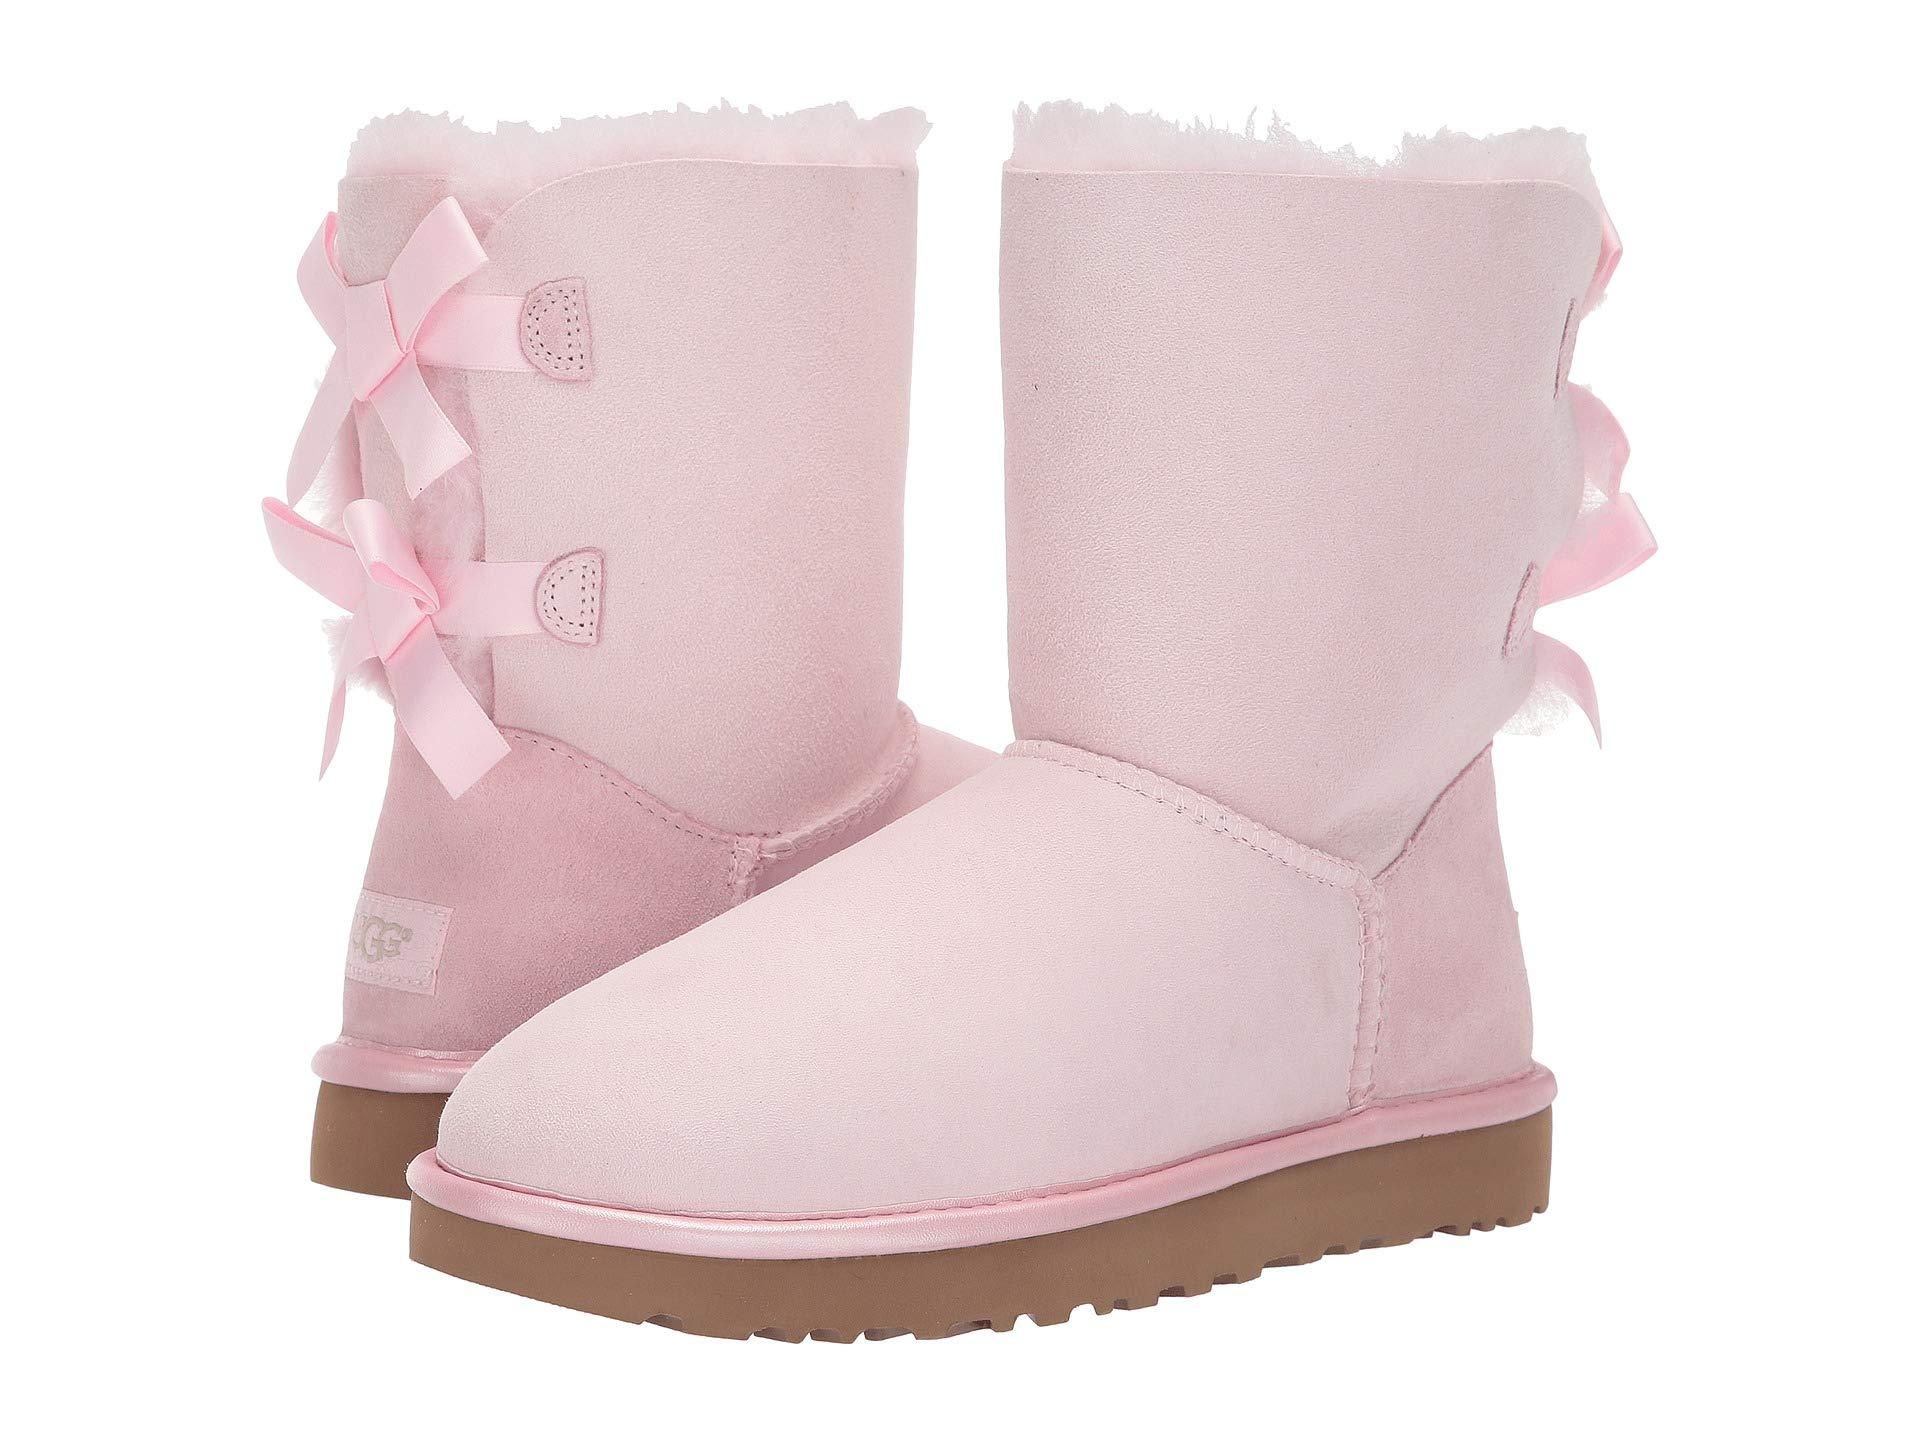 Pink Bailey Bow Ugg Boots Hotsell, SAVE 48% - aveclumiere.com